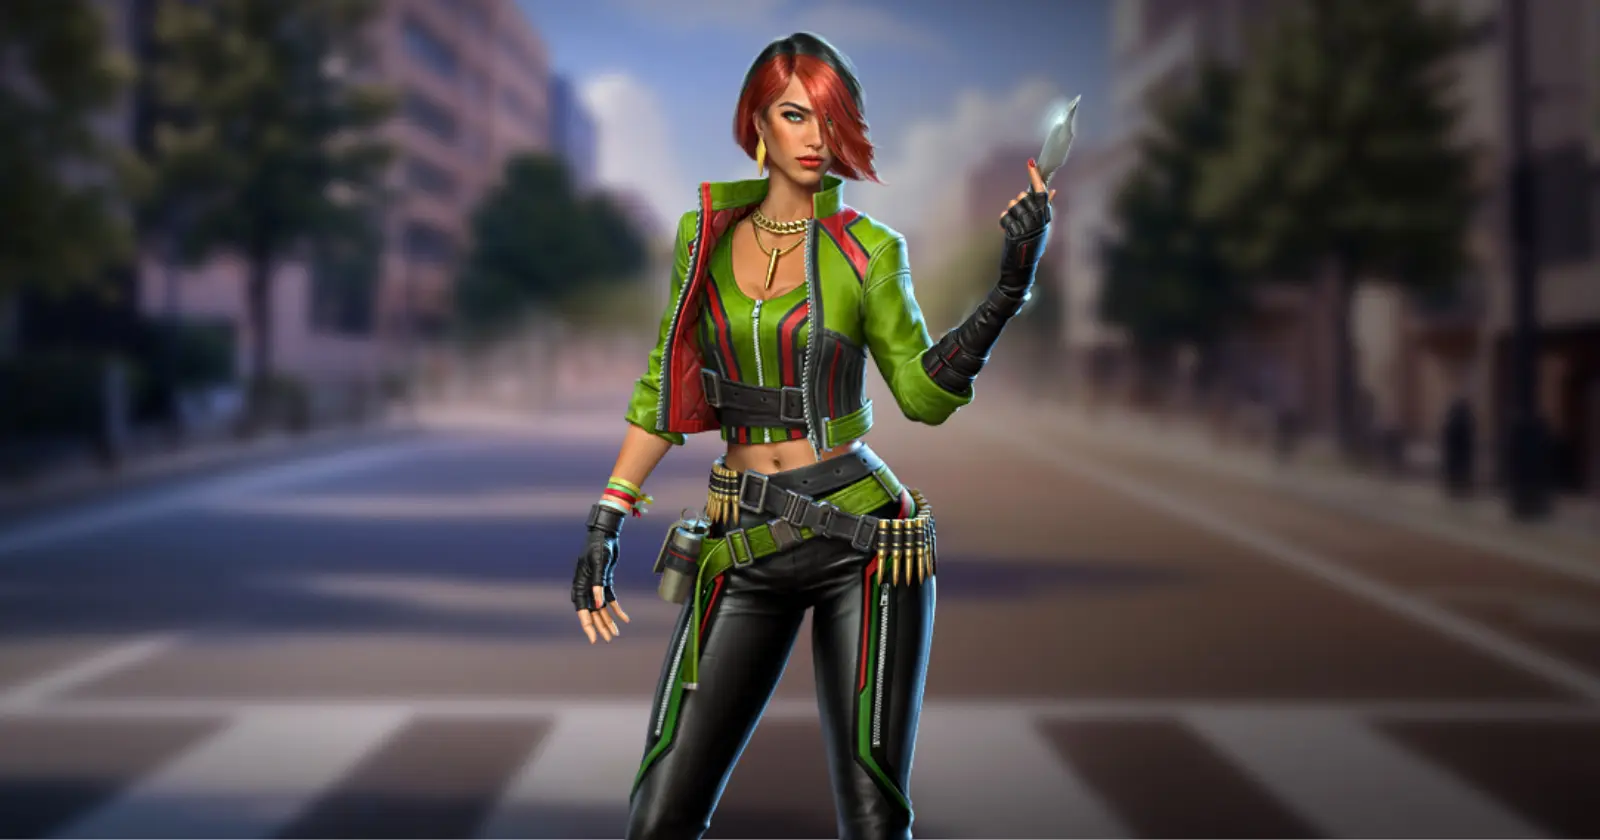 A woman named Paloma stands in a city street, wearing a green and black outfit, holding a shiny object in her hand.